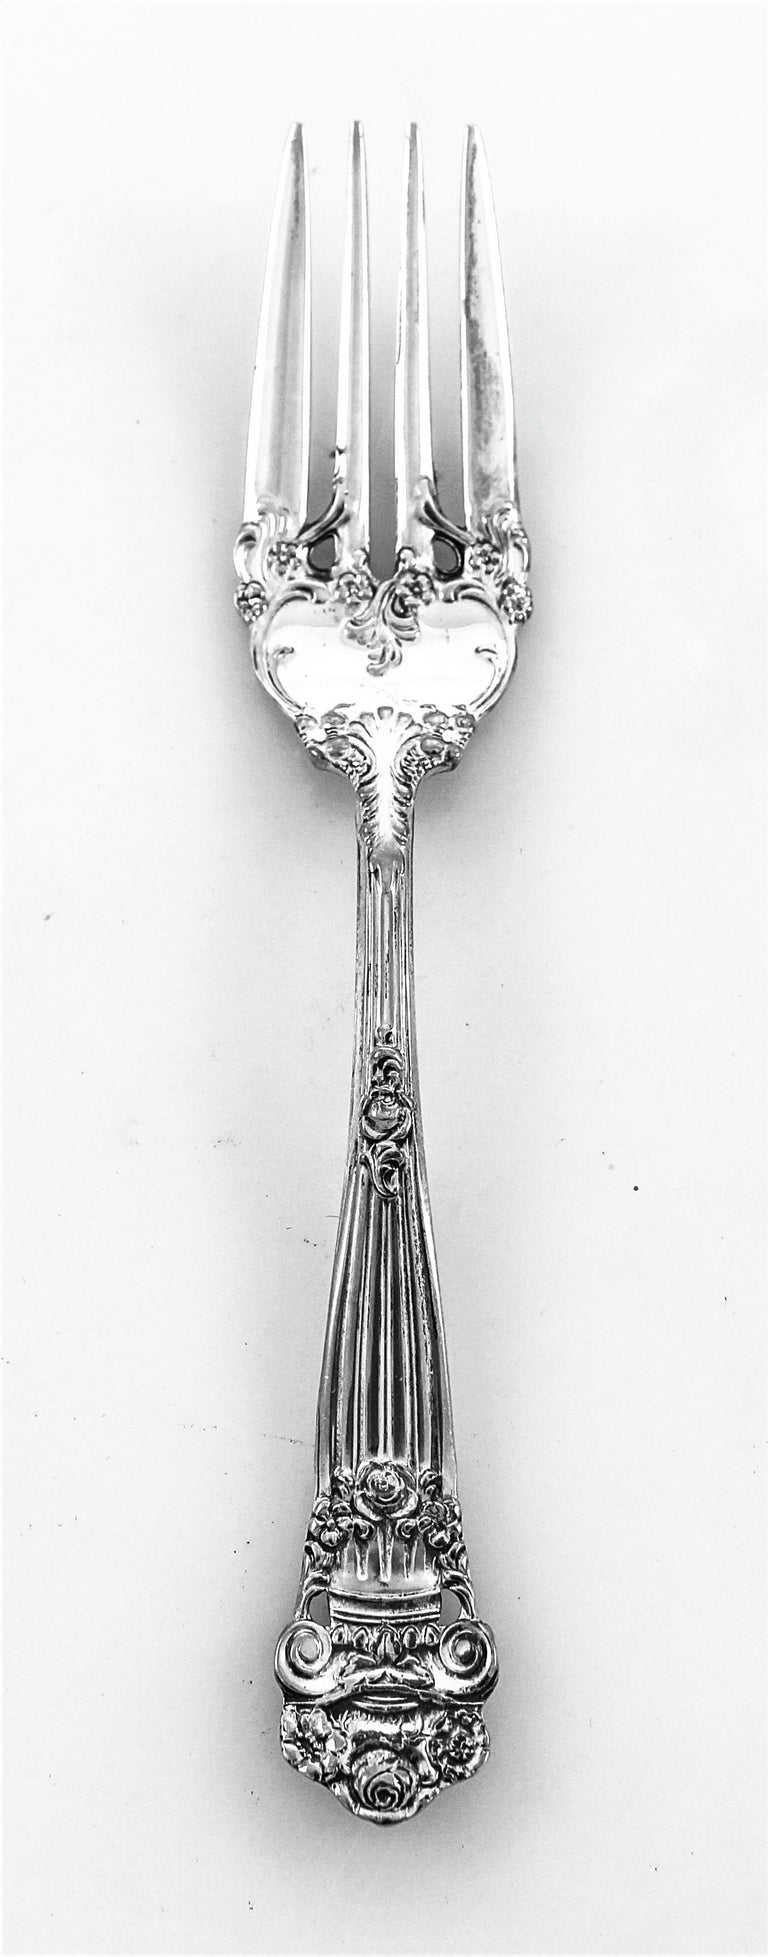 Mid-20th Century Georgian Sterling Flatware / Service for 12 '60 Pieces' For Sale